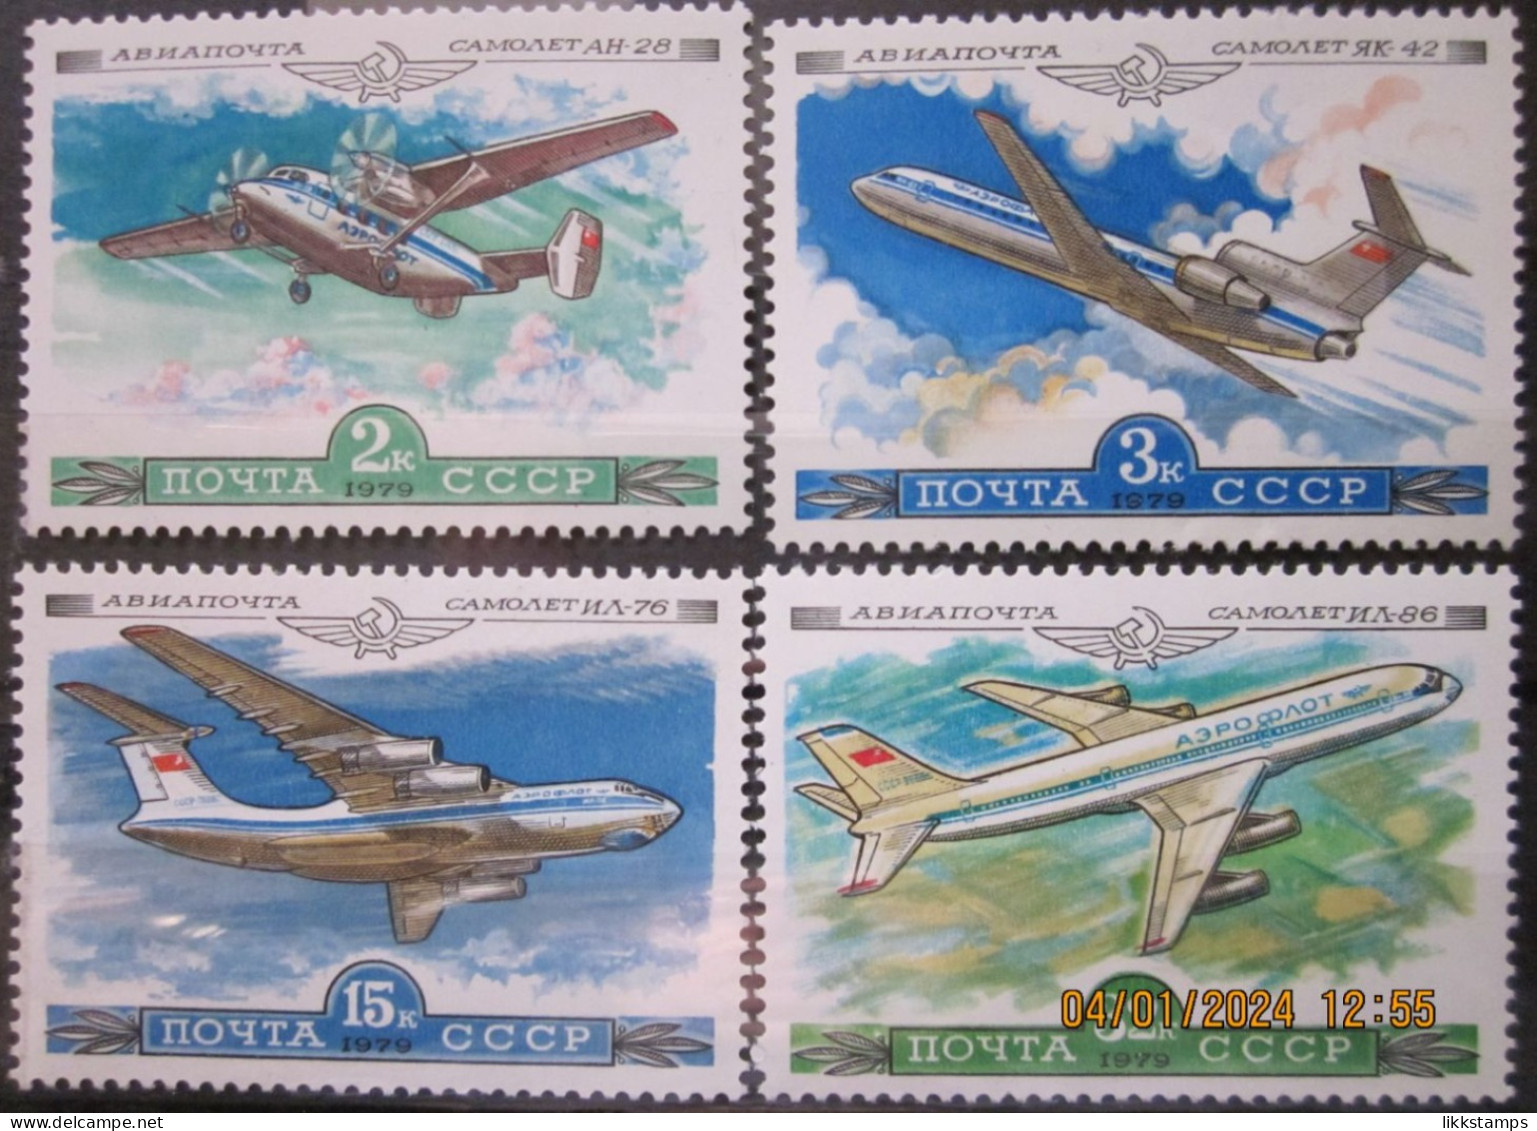 RUSSIA ~ 1979 ~ S.G. NUMBERS 4883 - 4884 + 4886 - 4887, ~ AIRCRAFT. ~ MNH #03596 - Ungebraucht